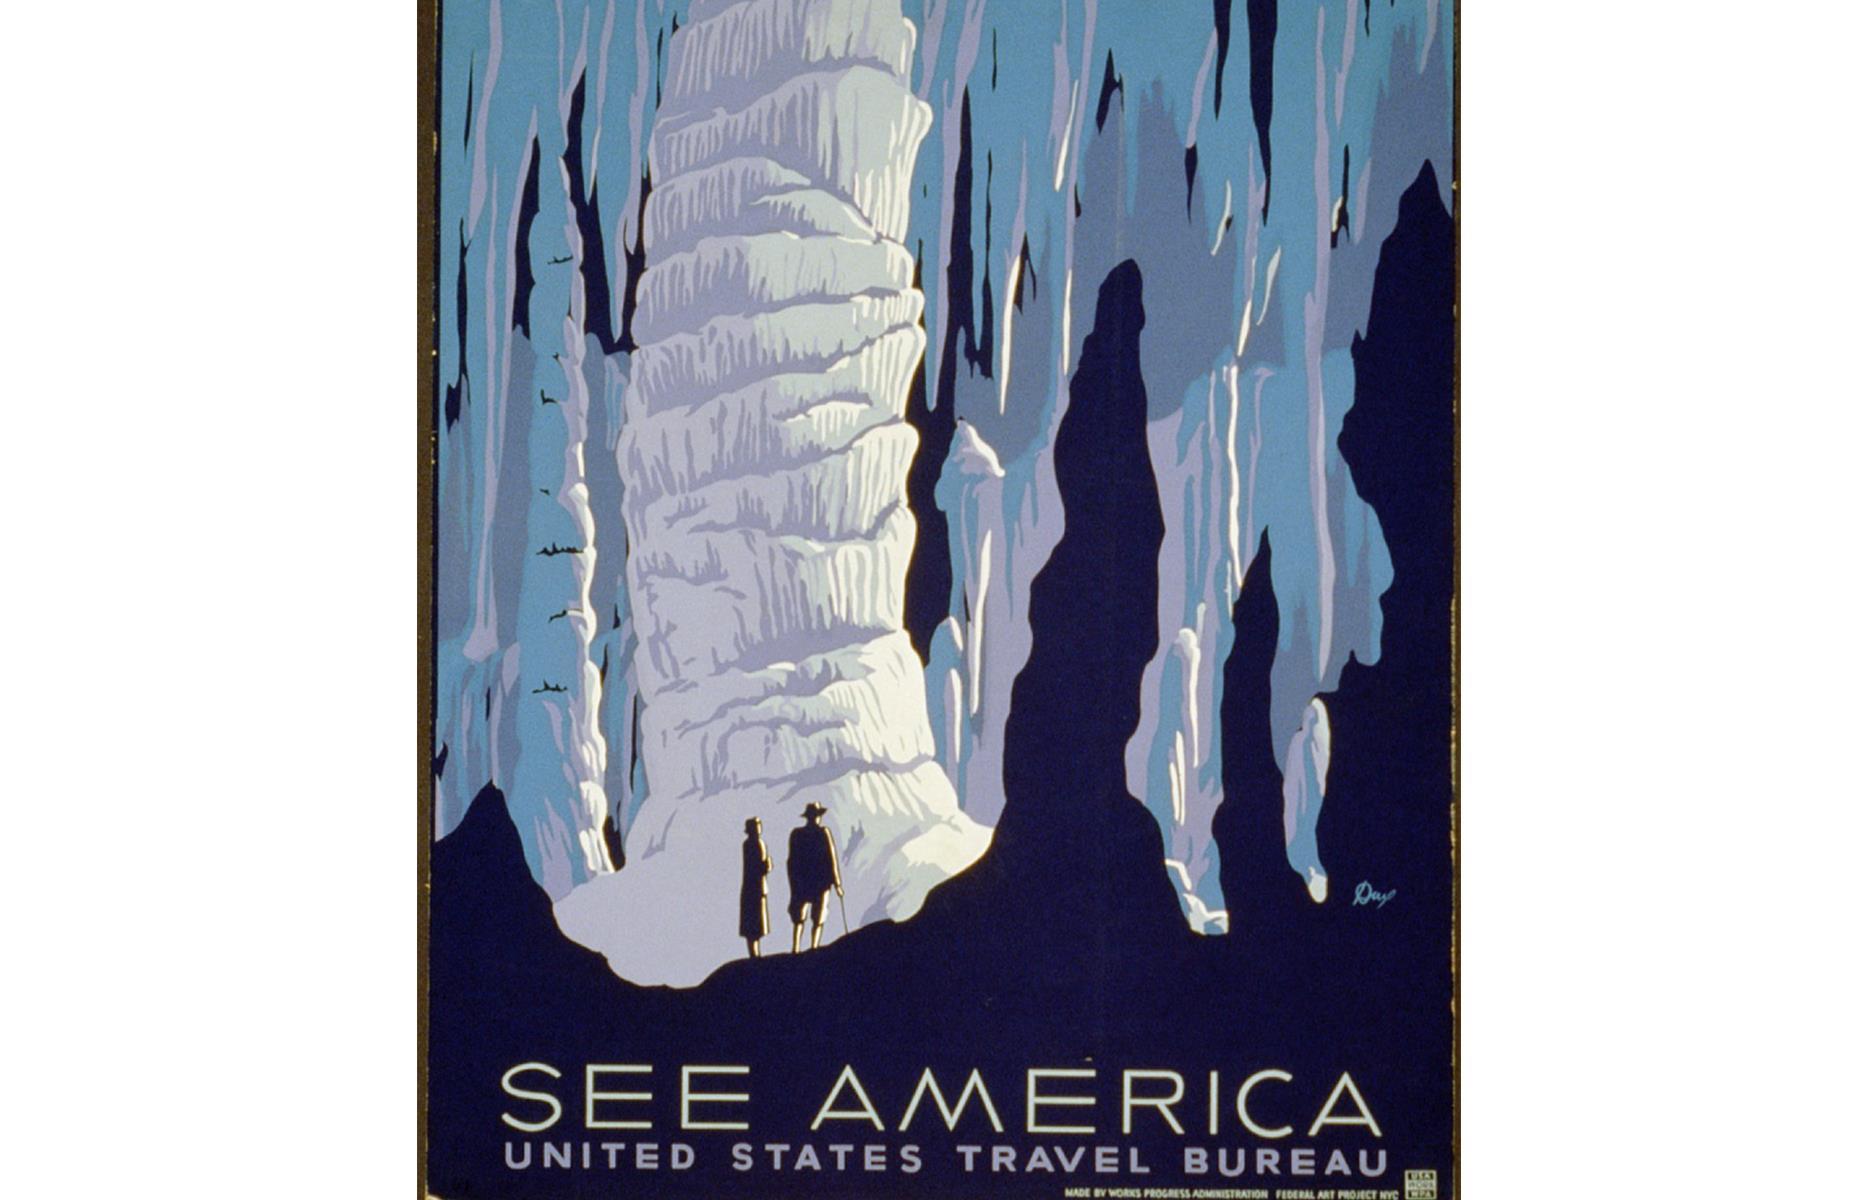 <p>America's natural beauty is captured again in this advert from the United States Travel Bureau. "See America" is the call as awestruck travelers gaze upon the ice-colored stalactites in a sprawling cave system. The poster dates back to the 1930s. </p>  <p><a href="http://bit.ly/3roL4wv"><strong>Love this? Follow our Facebook page for more travel inspiration</strong></a></p>